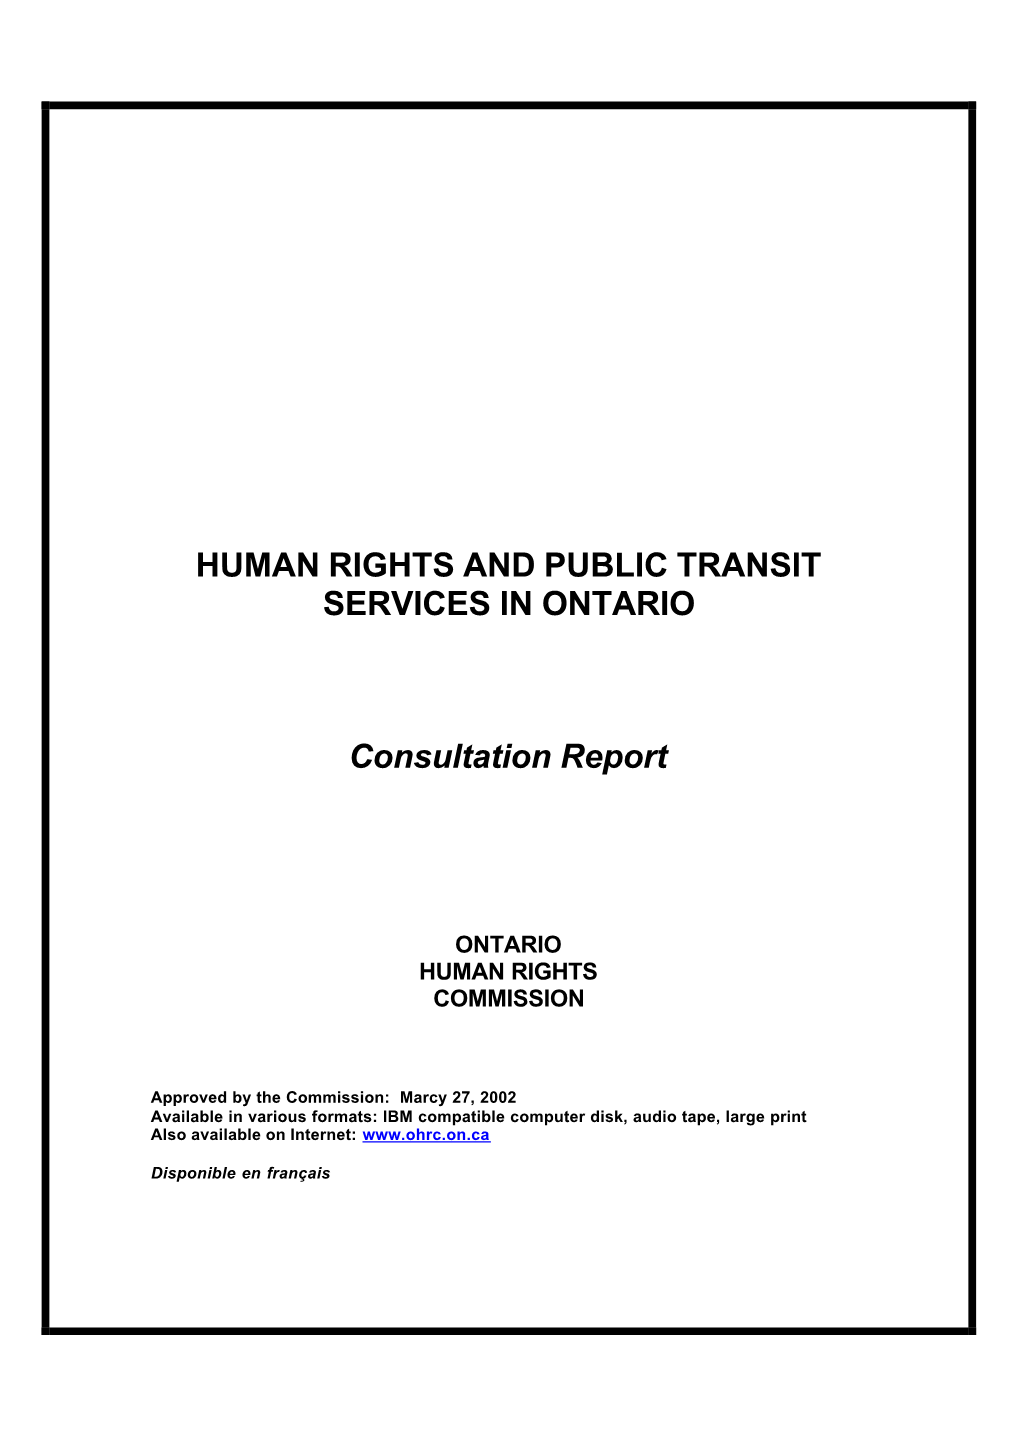 Consultation Report: Human Rights and Public Transit Services in Ontario